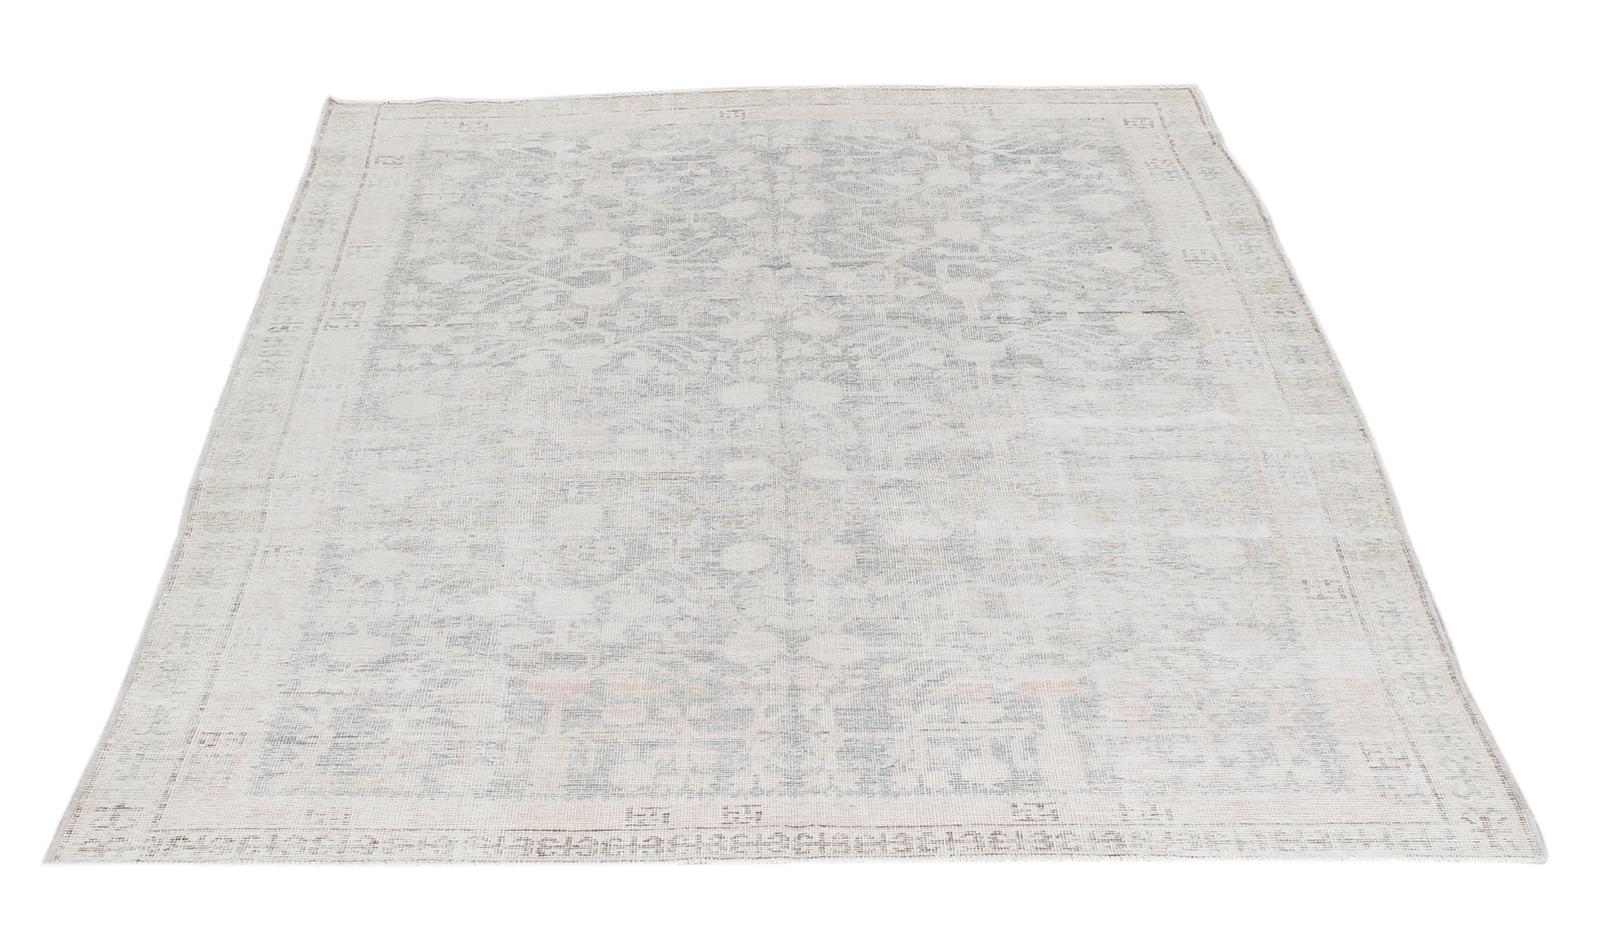 Khotan rugs are produced in East Turkestan and are interchangeably referred to as Samarkand rugs due to their close proximity to the cultural city center of the same name. Khotan rugs are distinguished by their geometric patterns ranging from soft